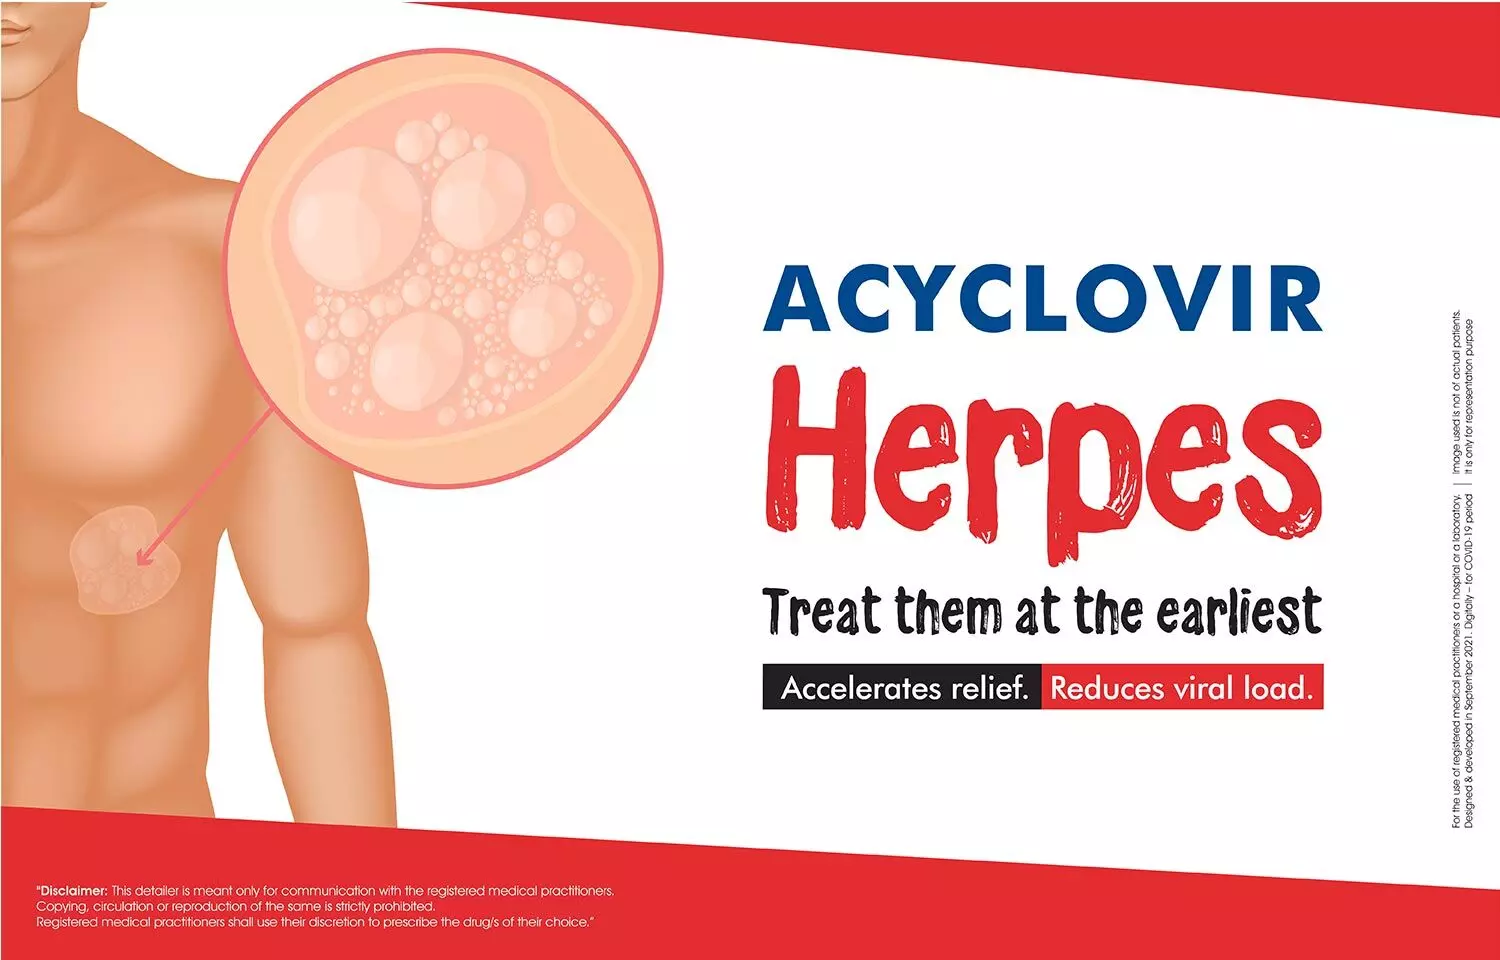 Acyclovir: How it reduces viral load and speeds up healing in herpes lesions